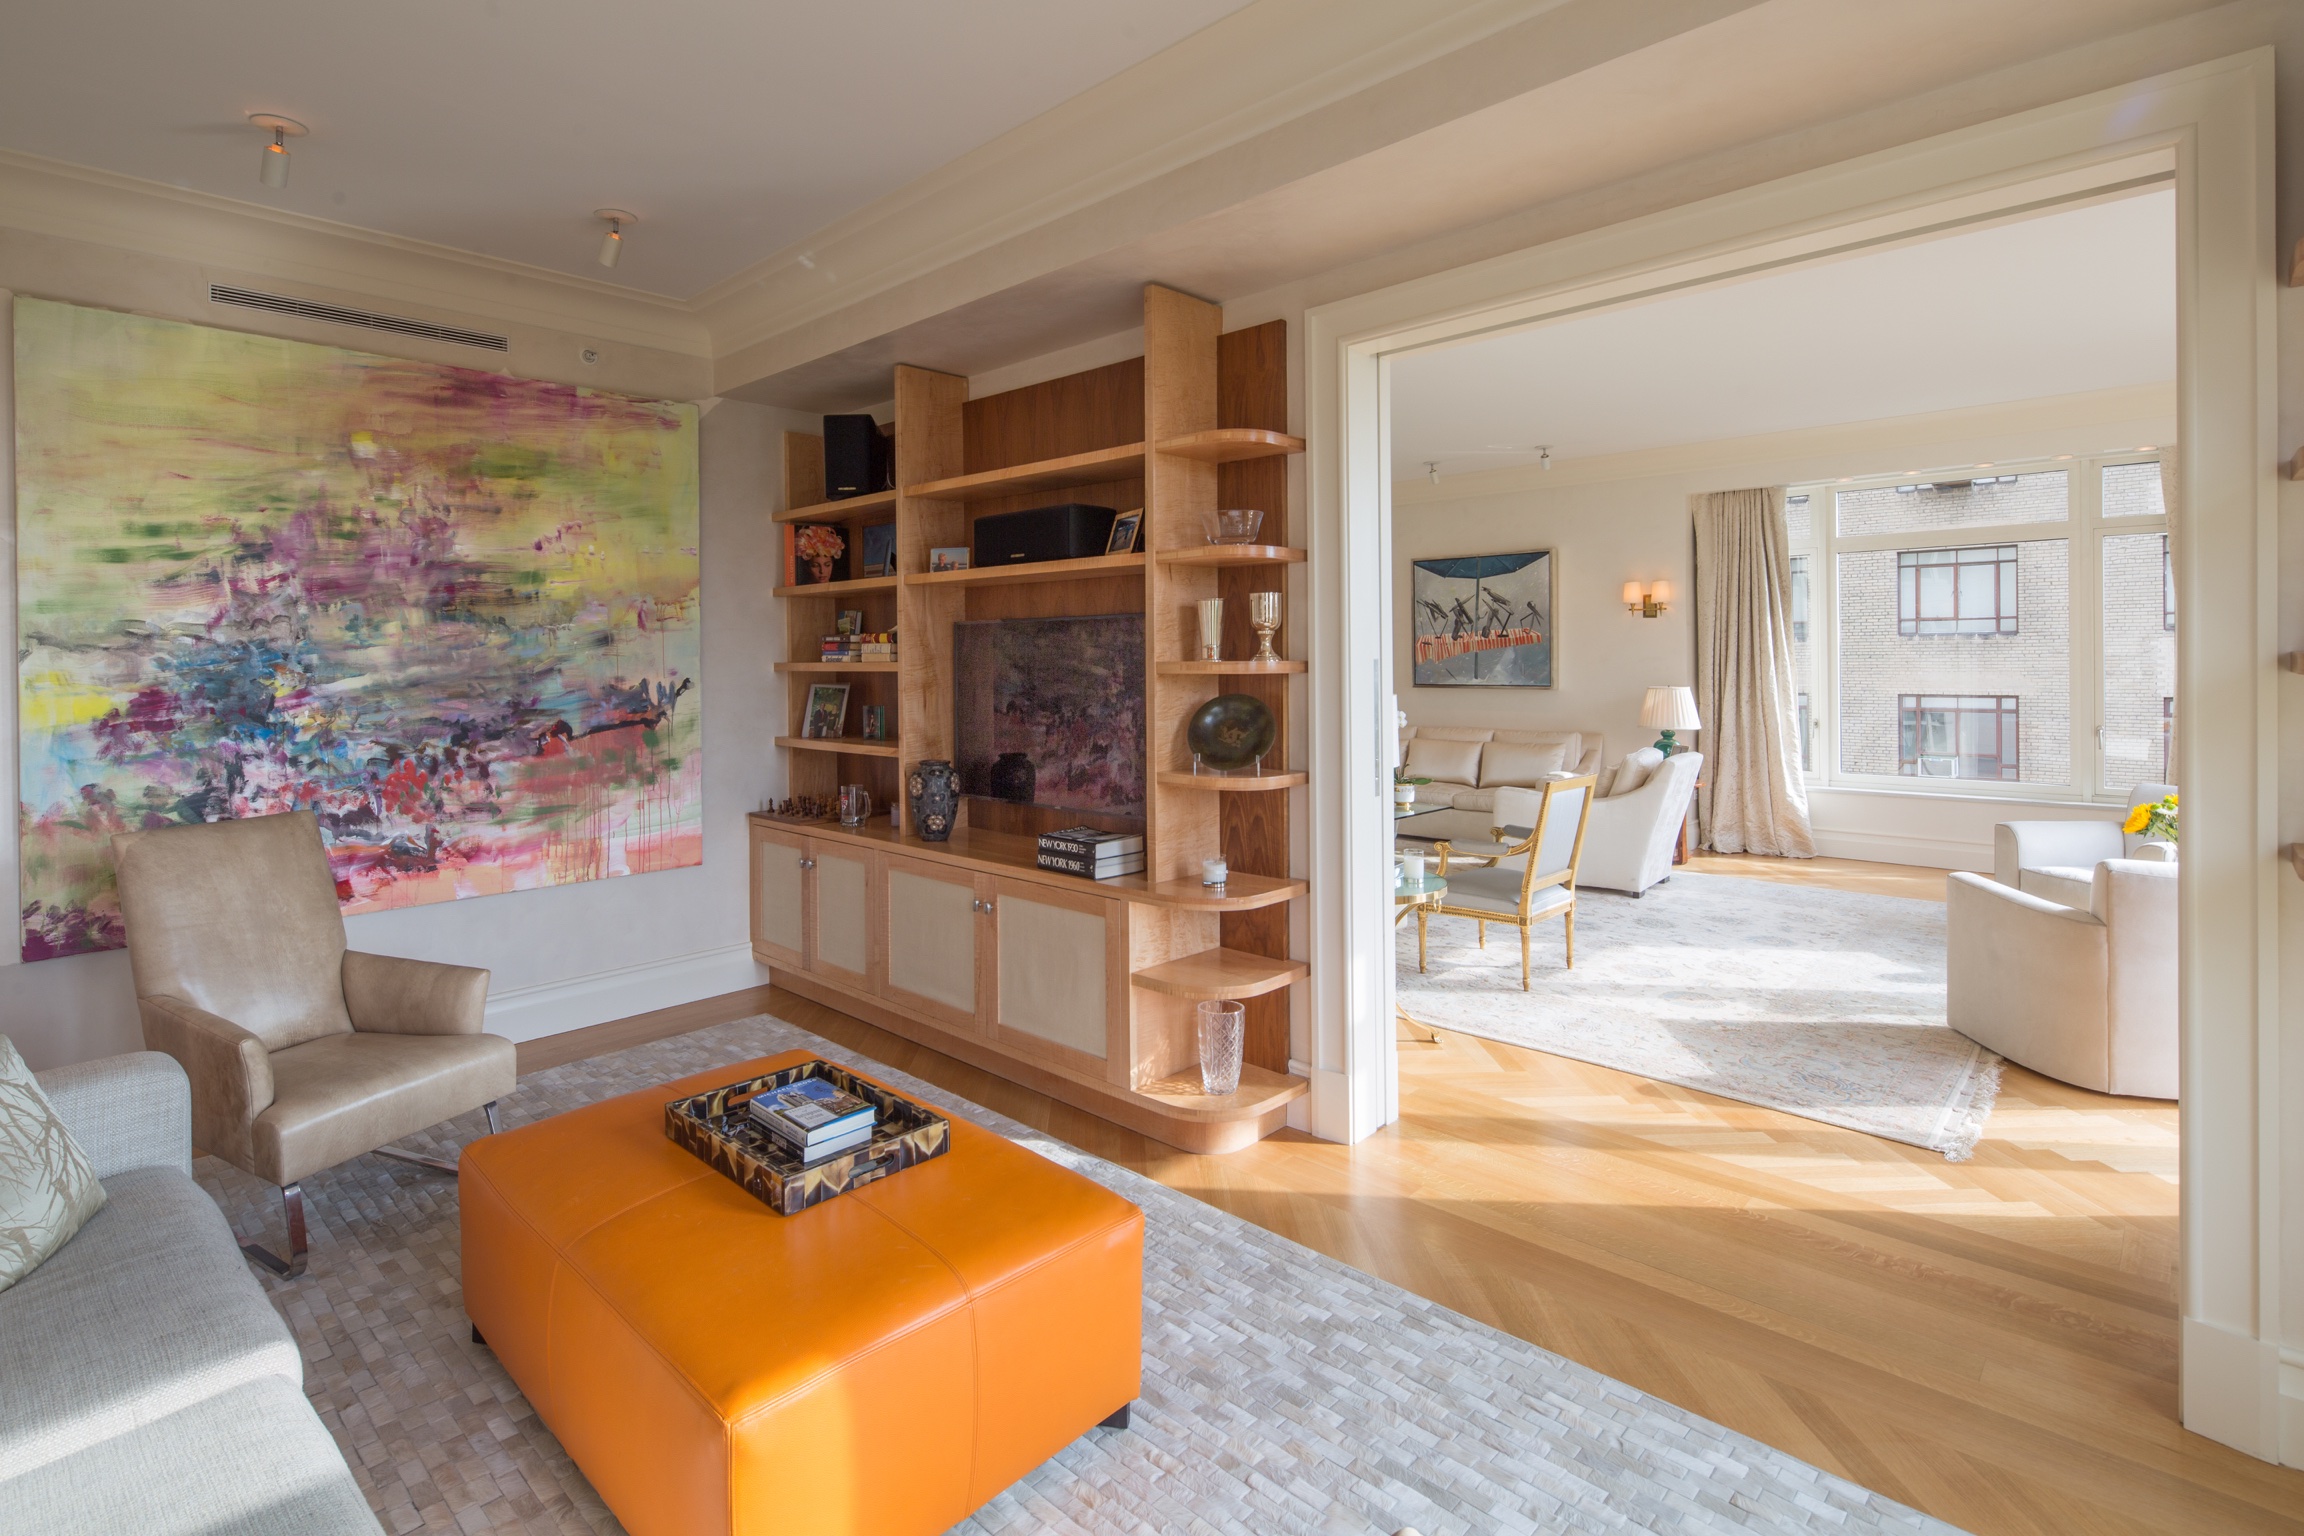 Custom furniture by Kevin Gray | Custom bookcases with two-tone woods, curved corners and raw silk fronts on lower cabinet